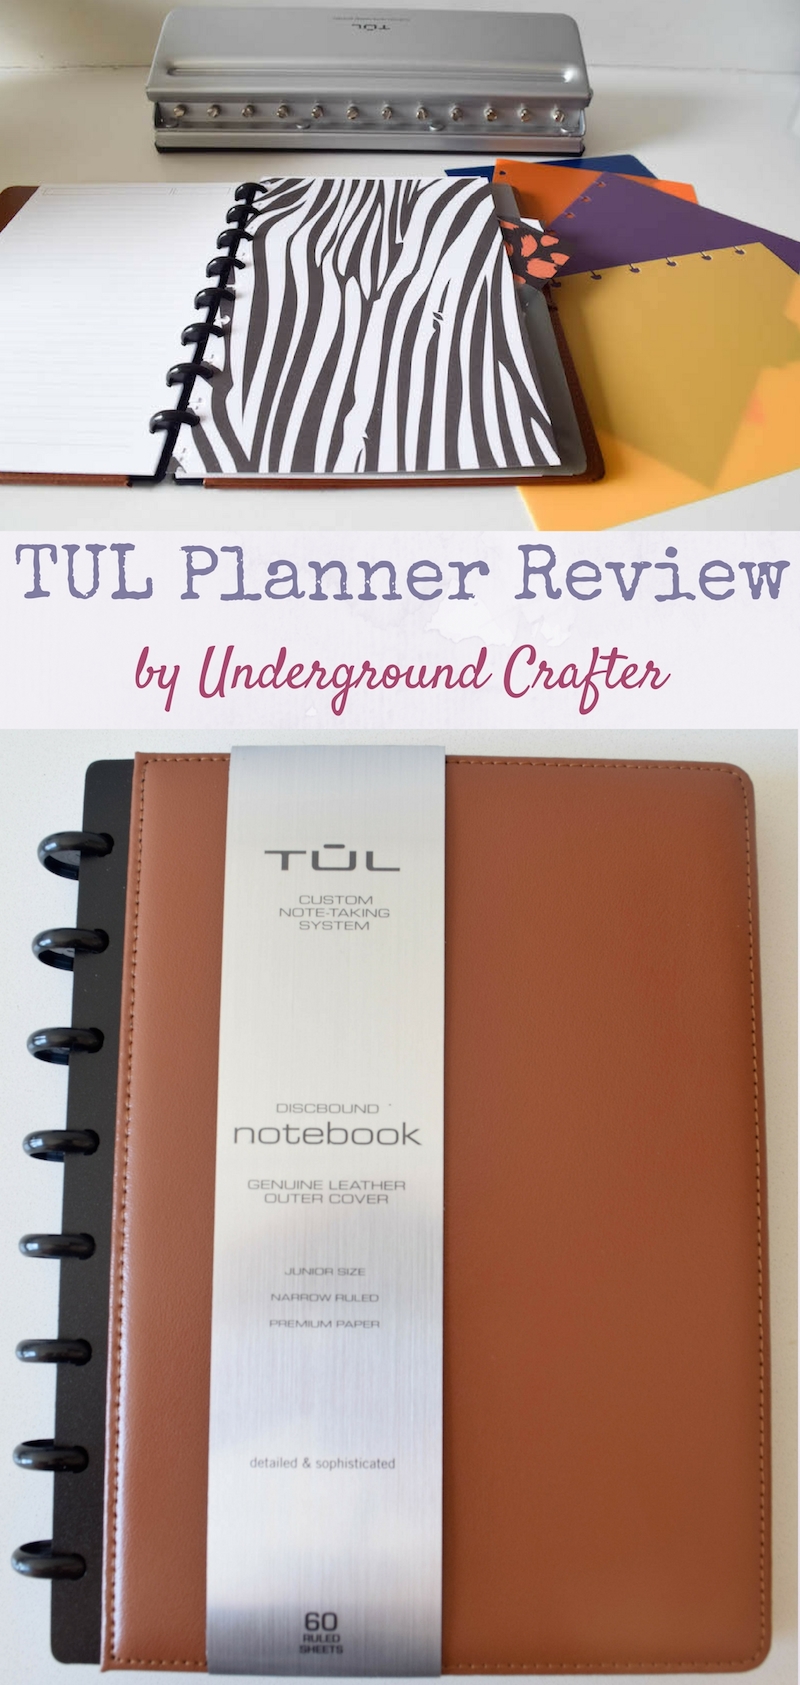 TUL Custom Note-Taking System Review by Underground Crafter | TUL makes an awesome planner that any crafter can customize. Learn more in my review and find TUL products at Office Depot.